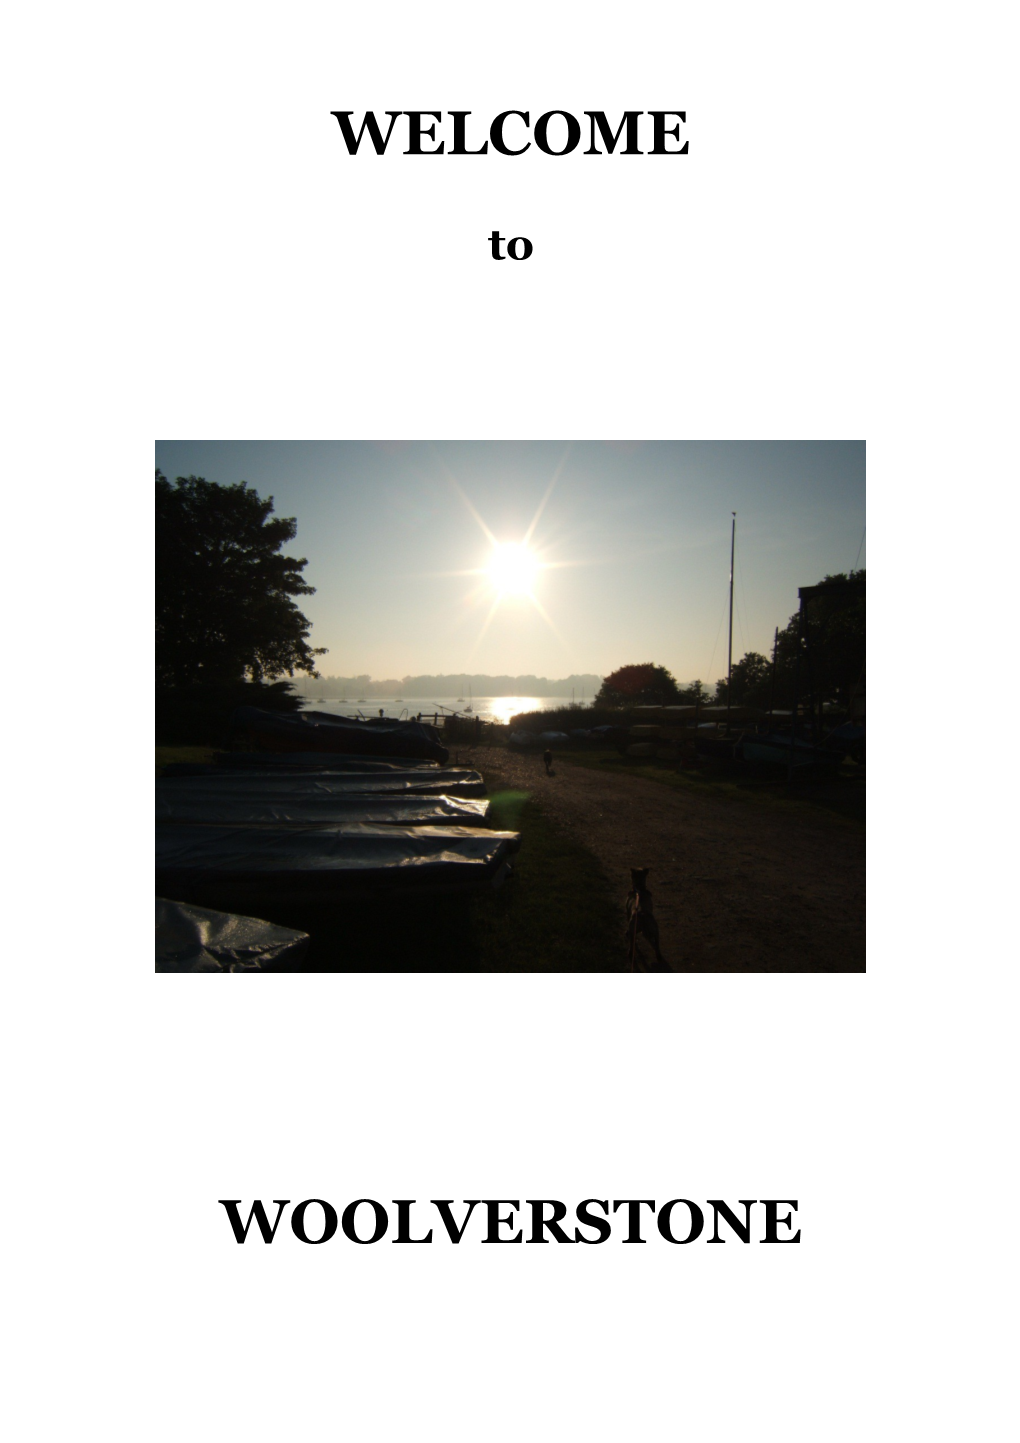 Welcome to Woolverstone